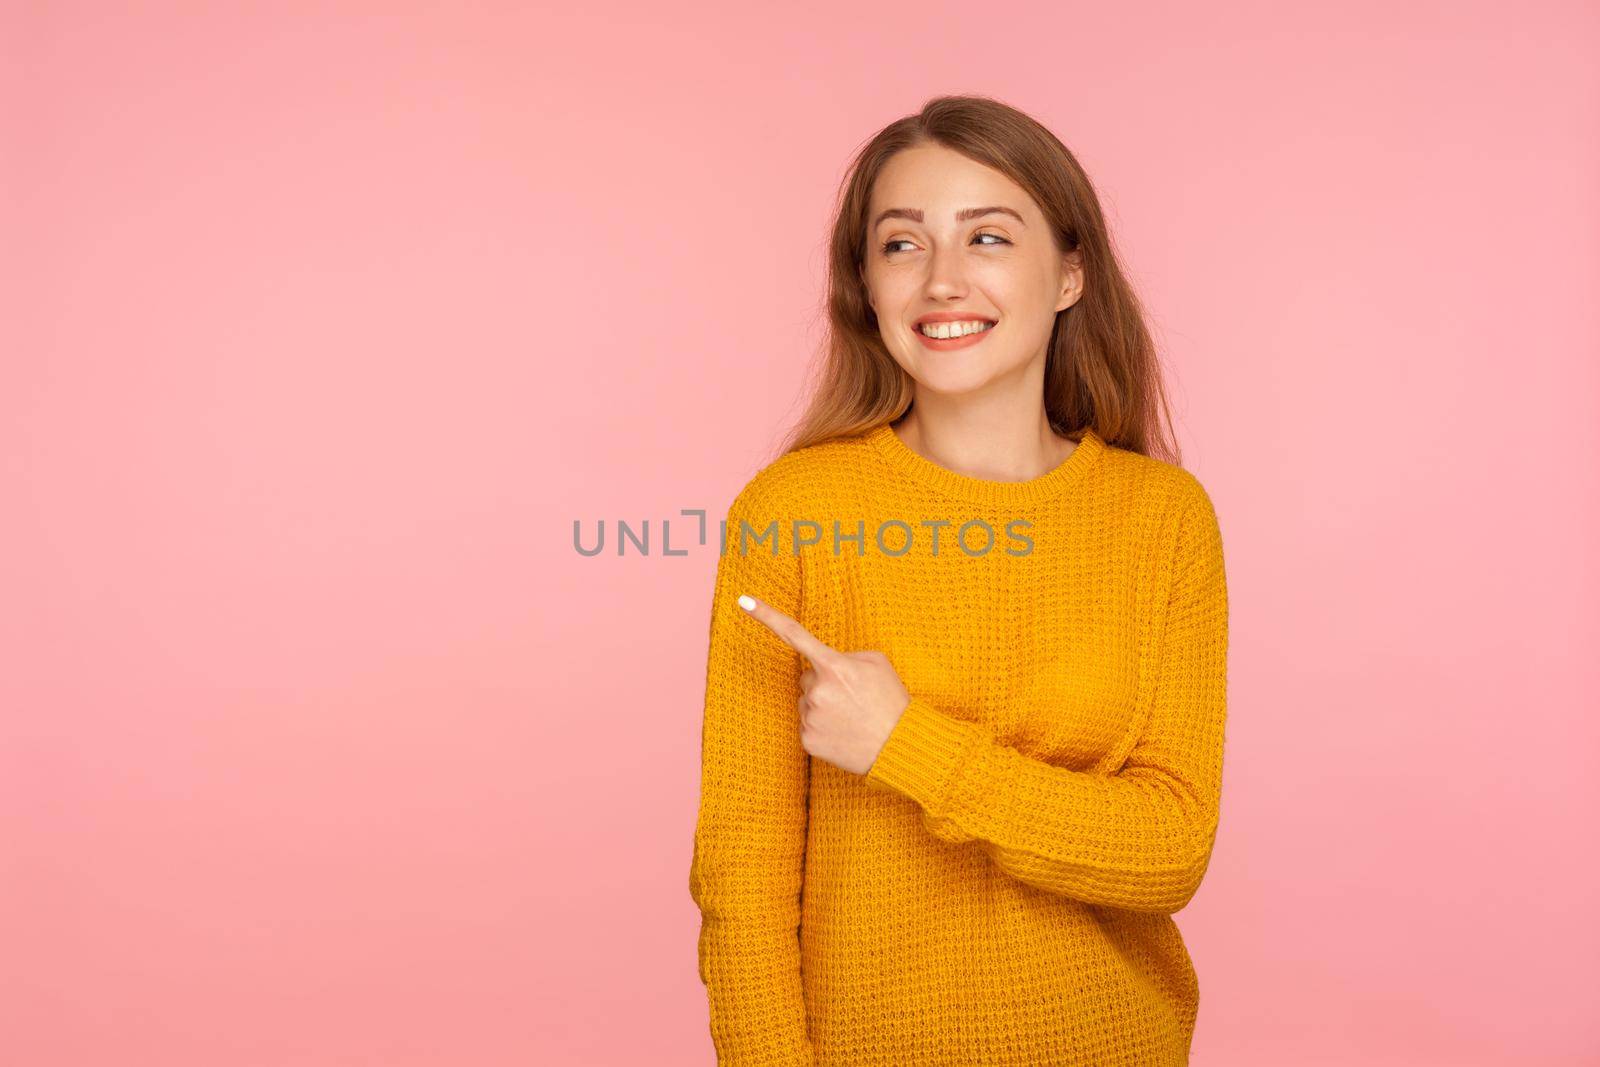 Look, attention. Portrait of cheerful attractive ginger girl in sweater pointing to the side and smiling, showing copy space, empty place for promotional text. studio shot isolated on pink background